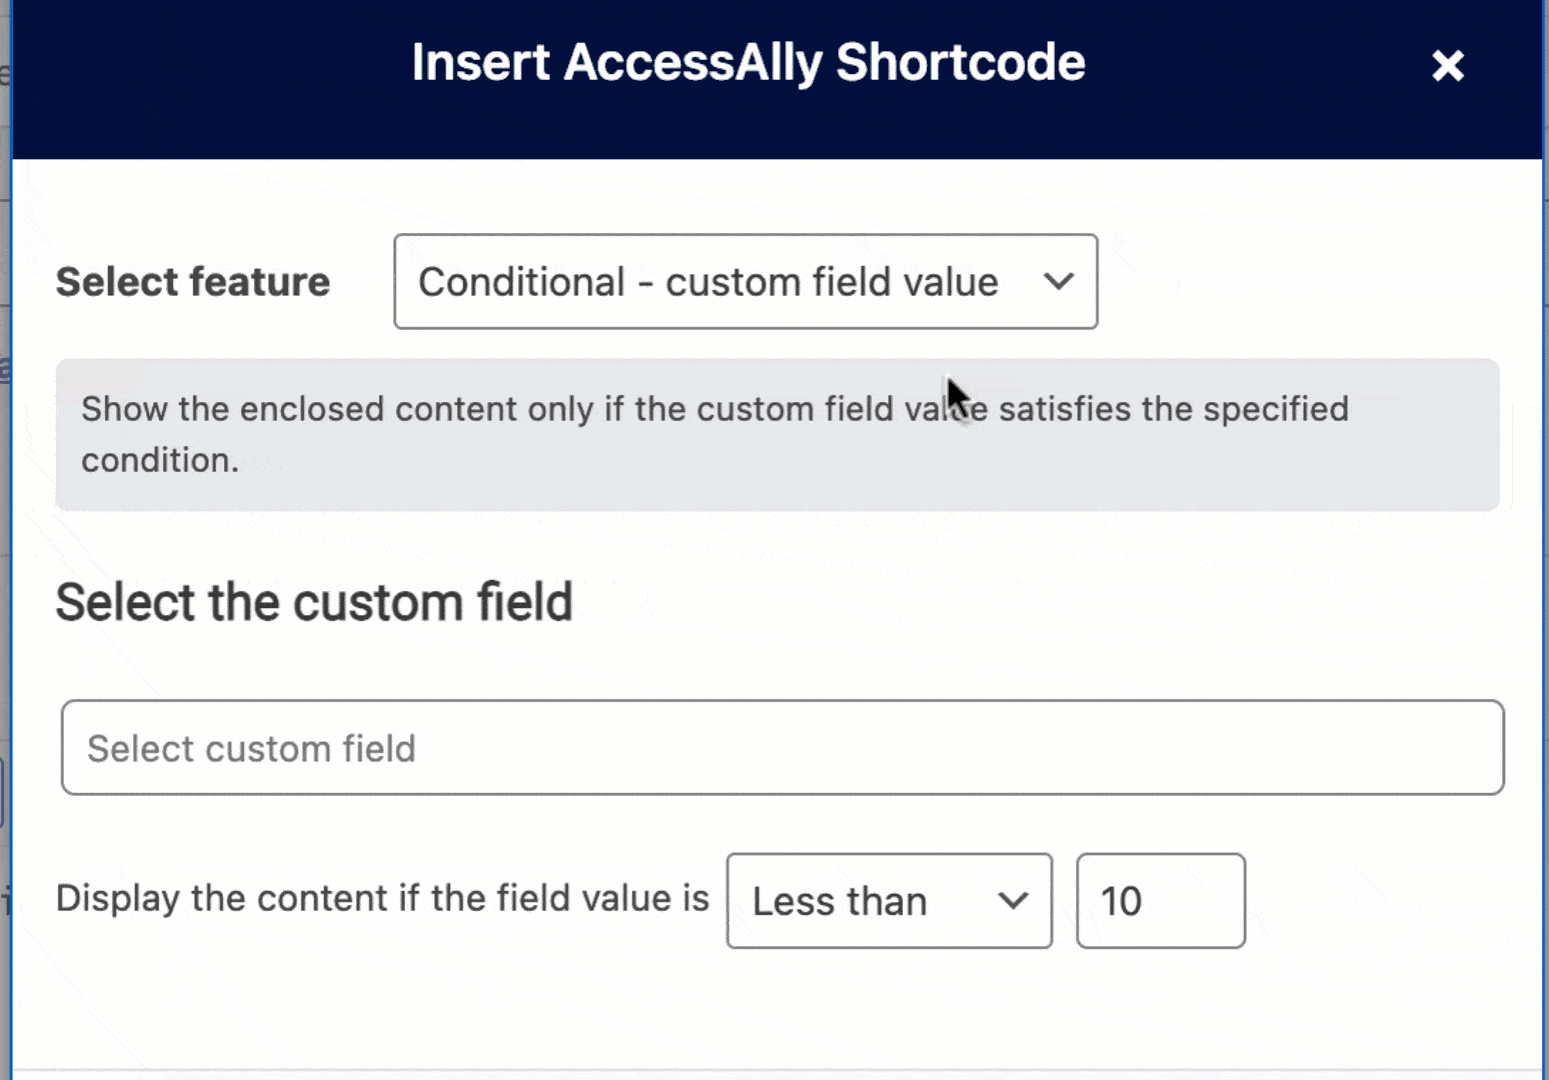 GIF from AccessAlly showing the steps to adding a custom field with conditional value set